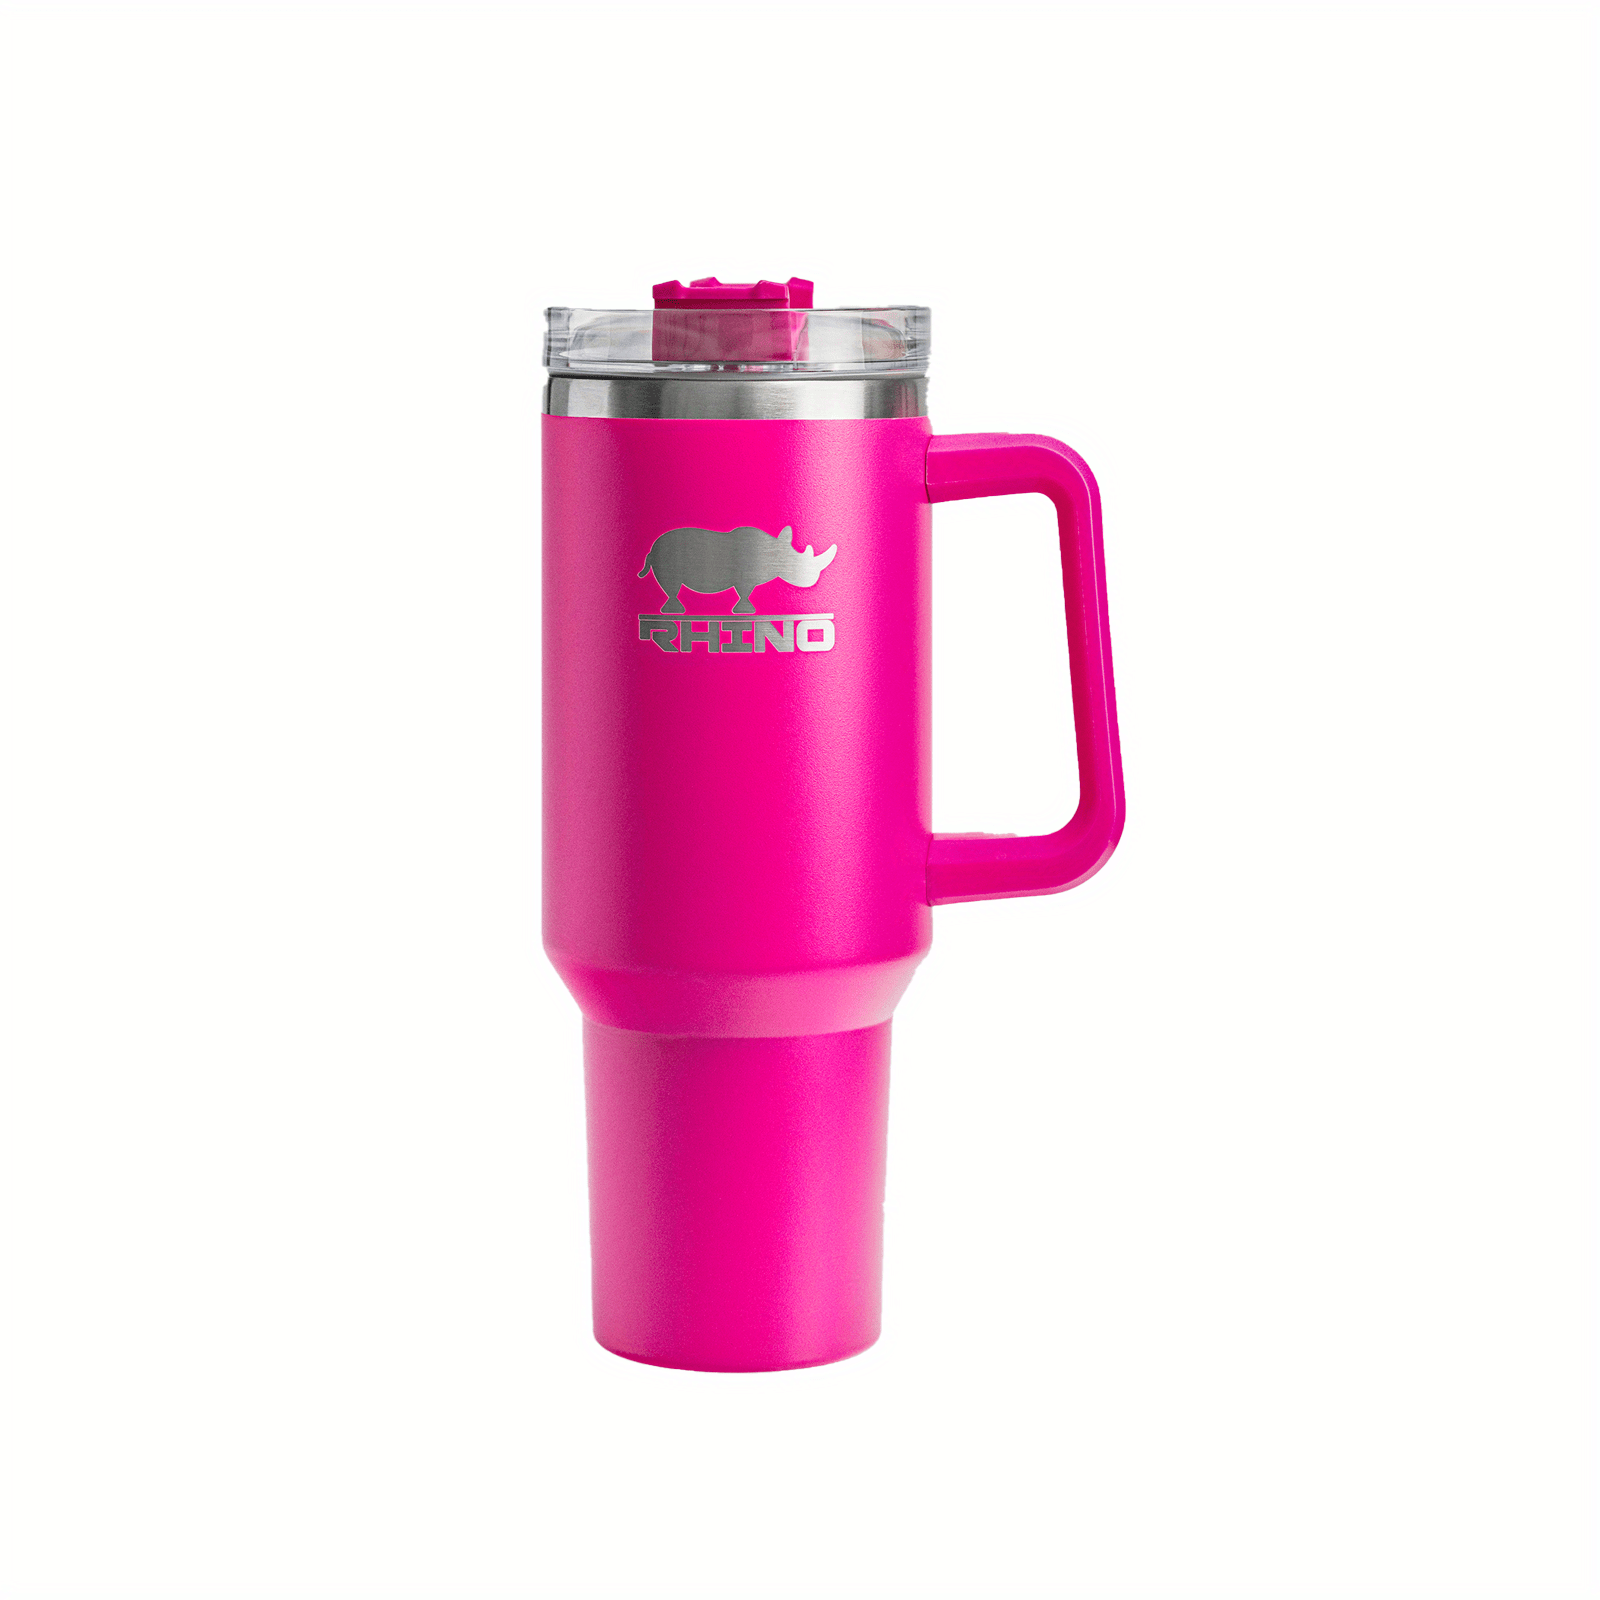 Greens Steel - Our Hot Pink 40oz Beast Tumbler is the